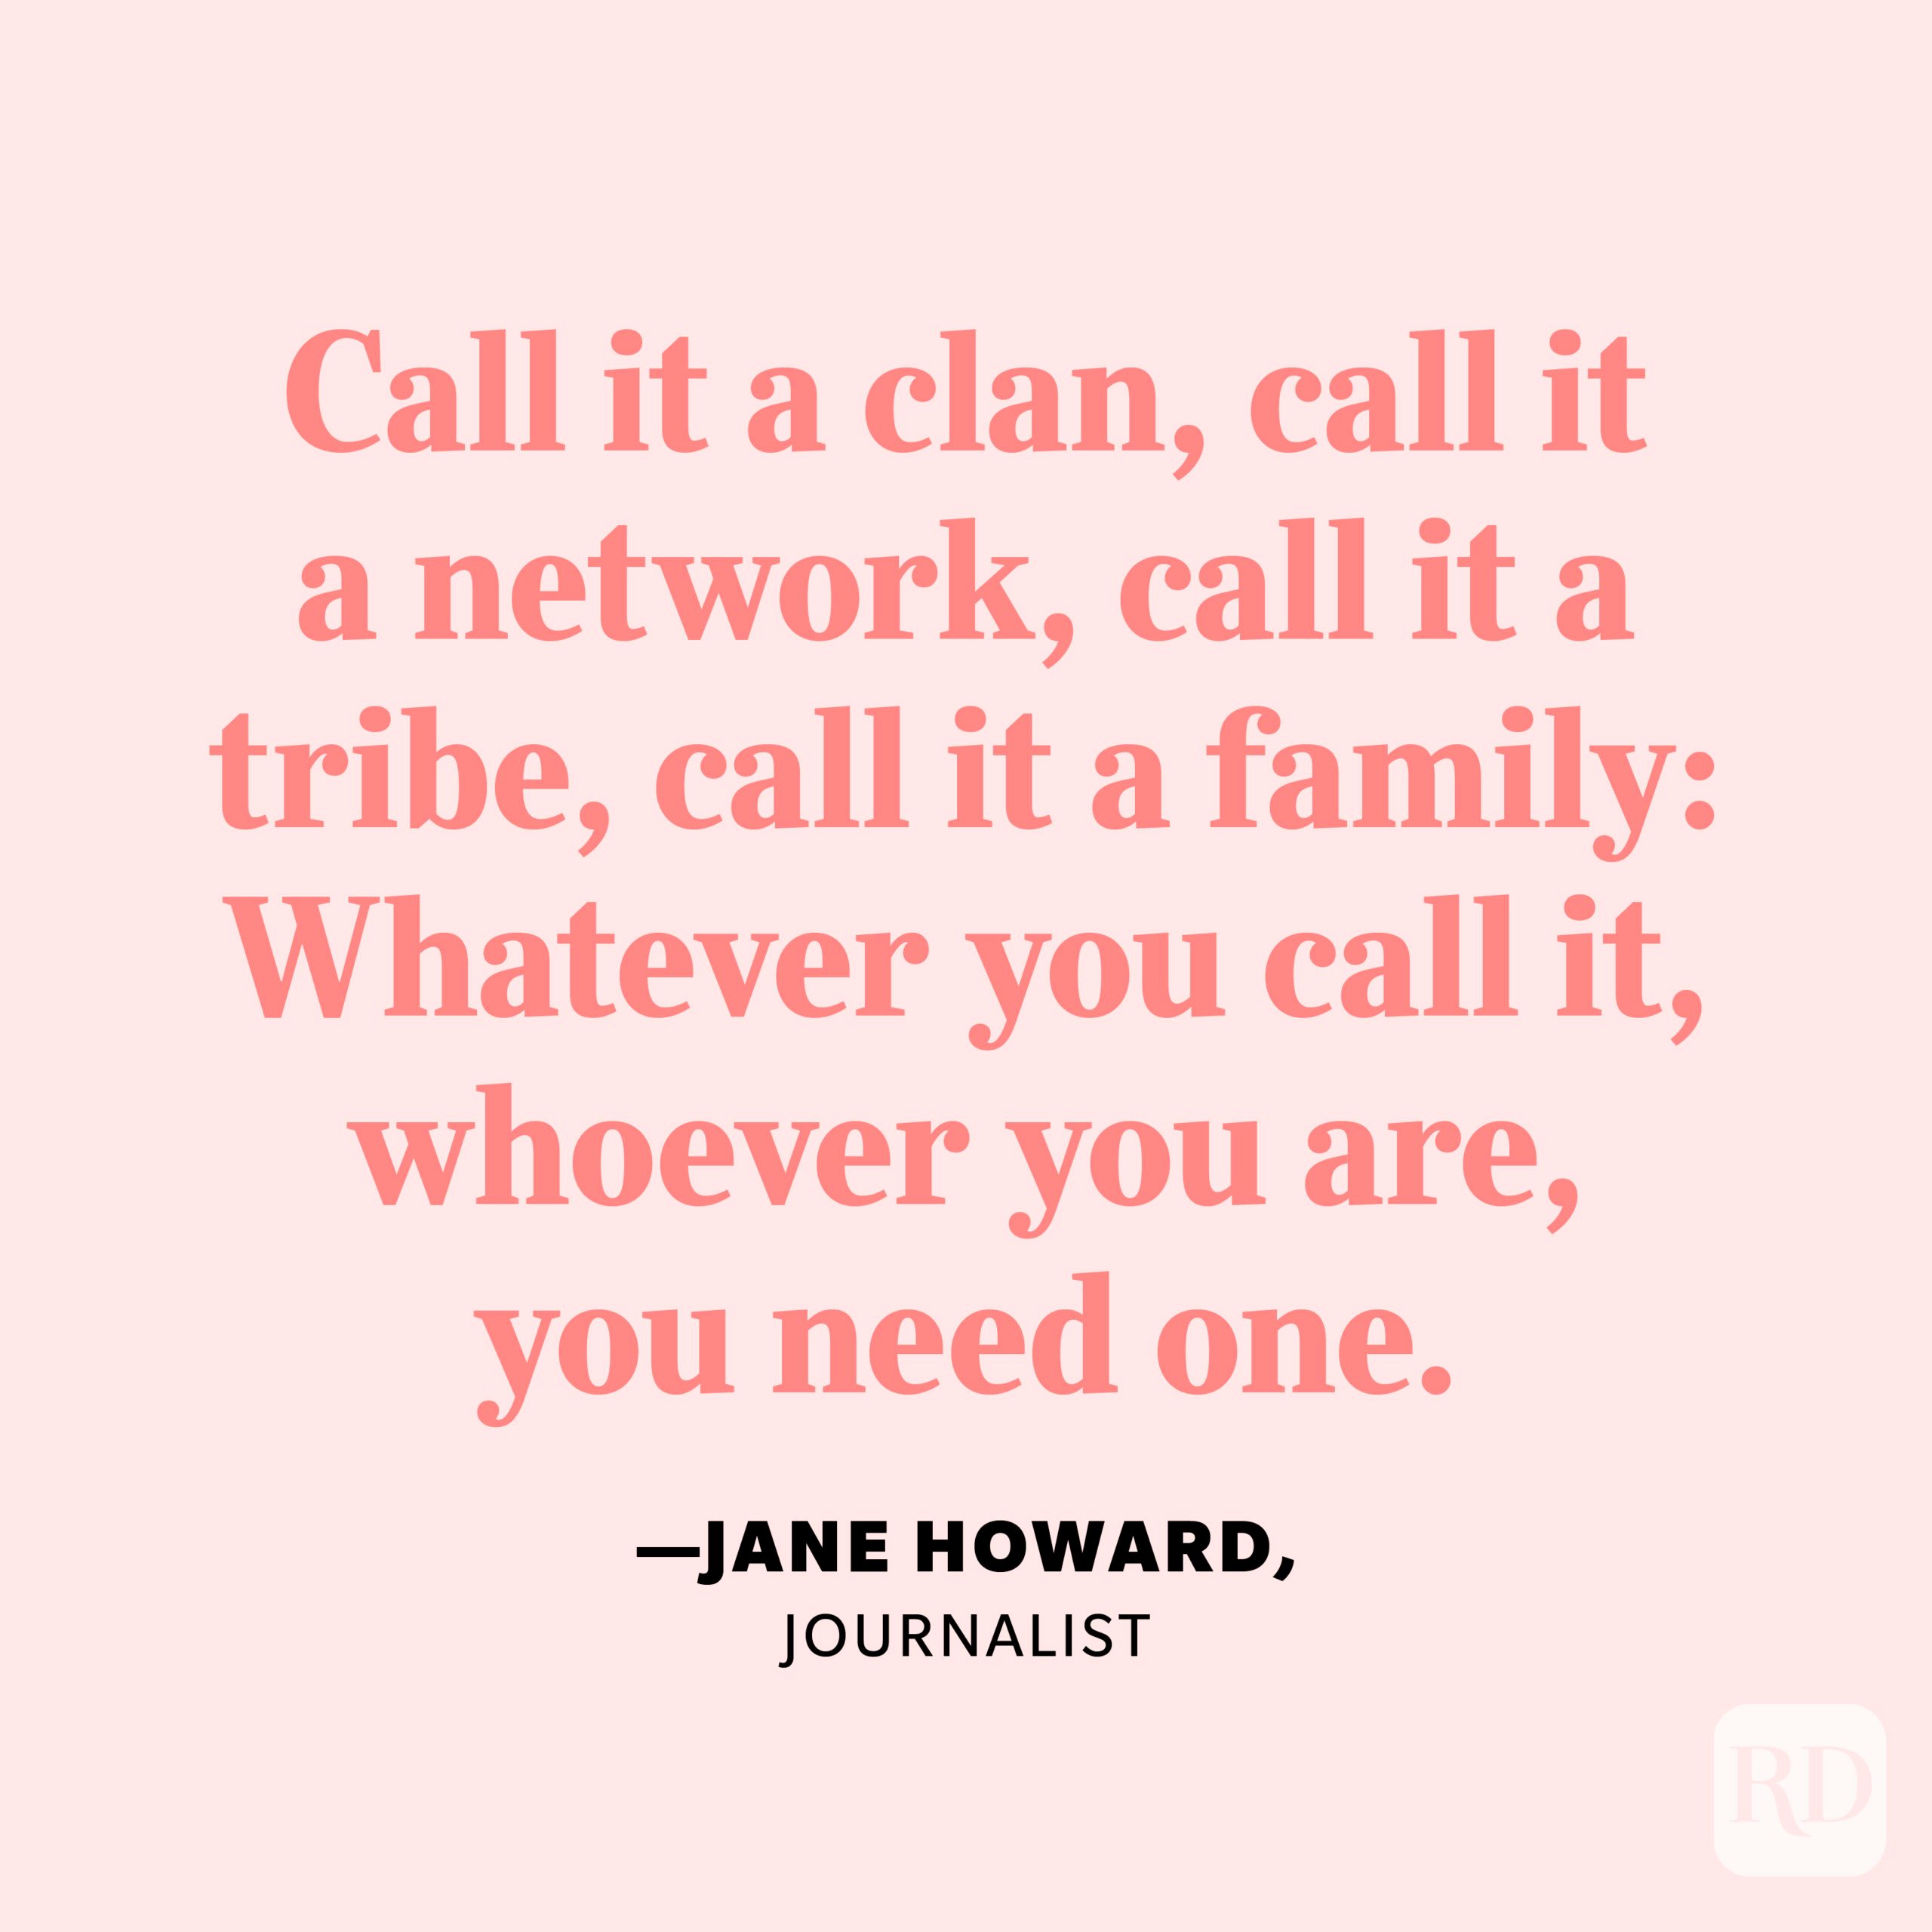 "Call it a clan, call it a network, call it a tribe, call it a family: Whatever you call it, whoever you are, you need one." —Jane Howard, journalist.